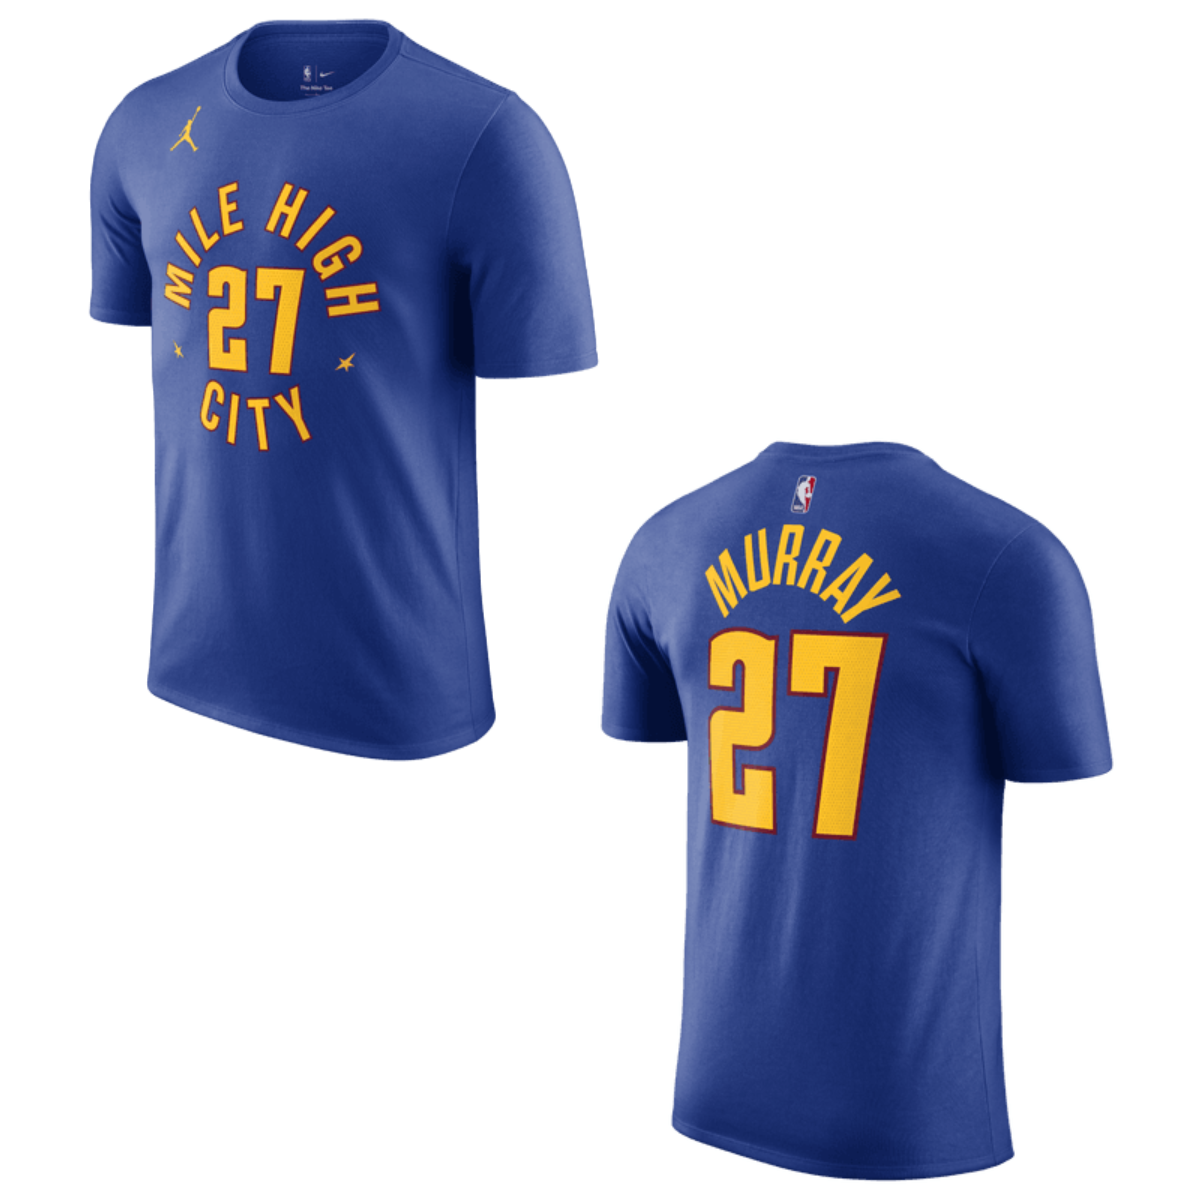 2023-24 Nuggets S/S Statement Player Tees